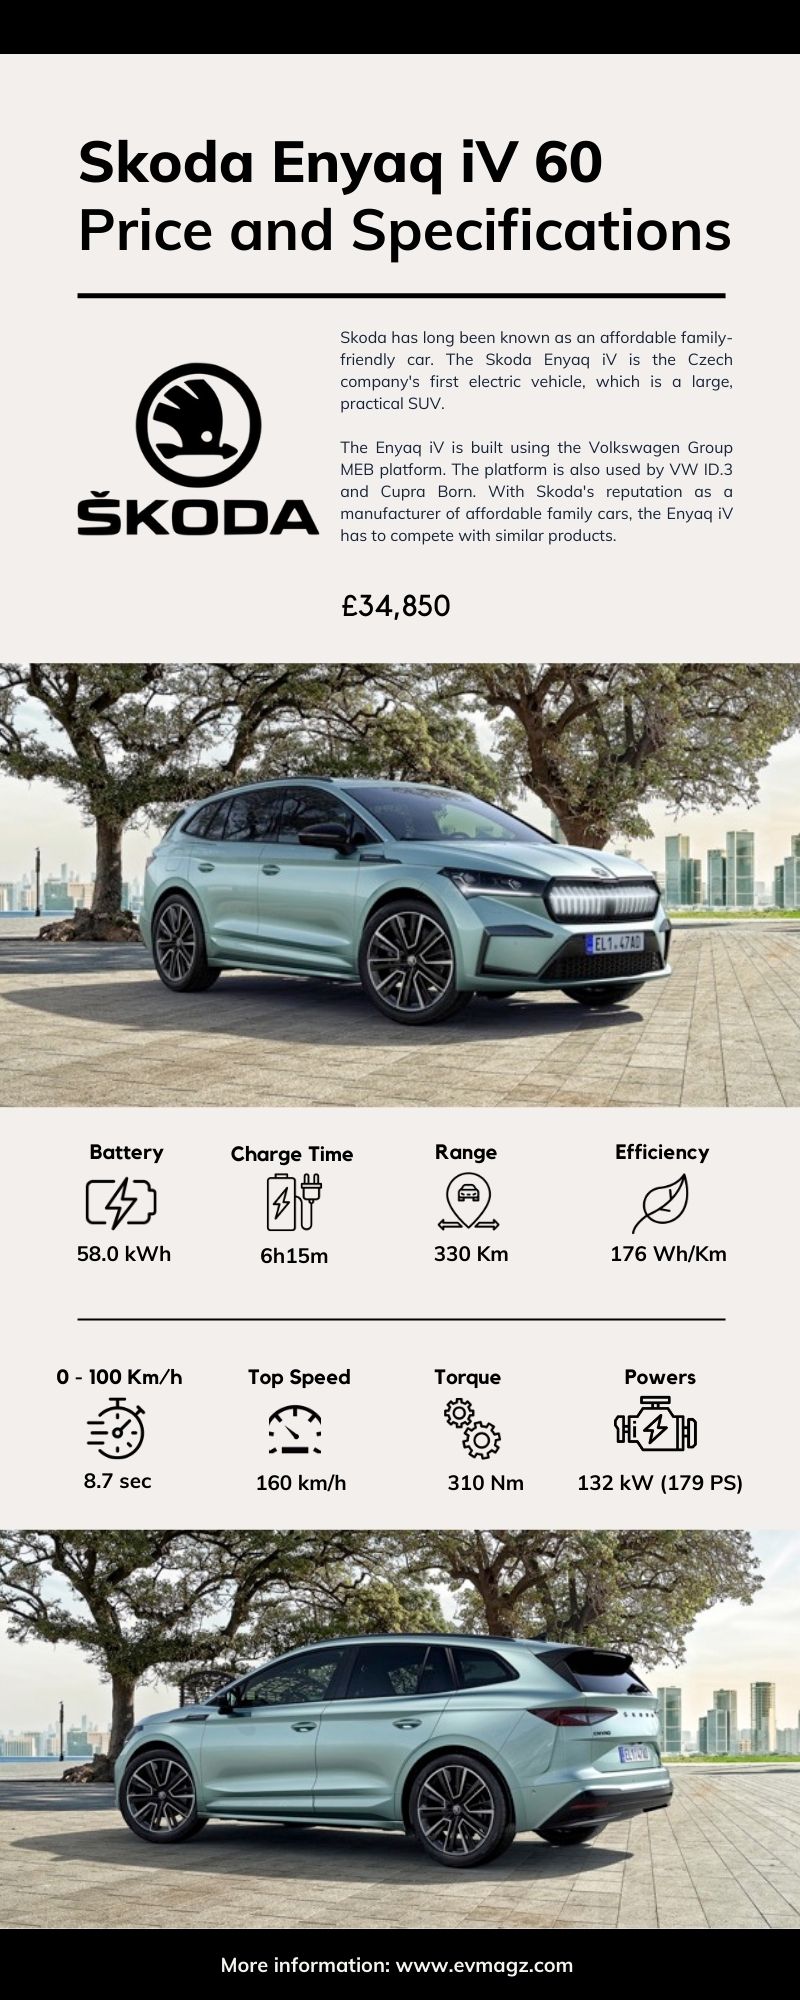 Skoda Enyaq iV 60 Price and Specifications [Infographic]